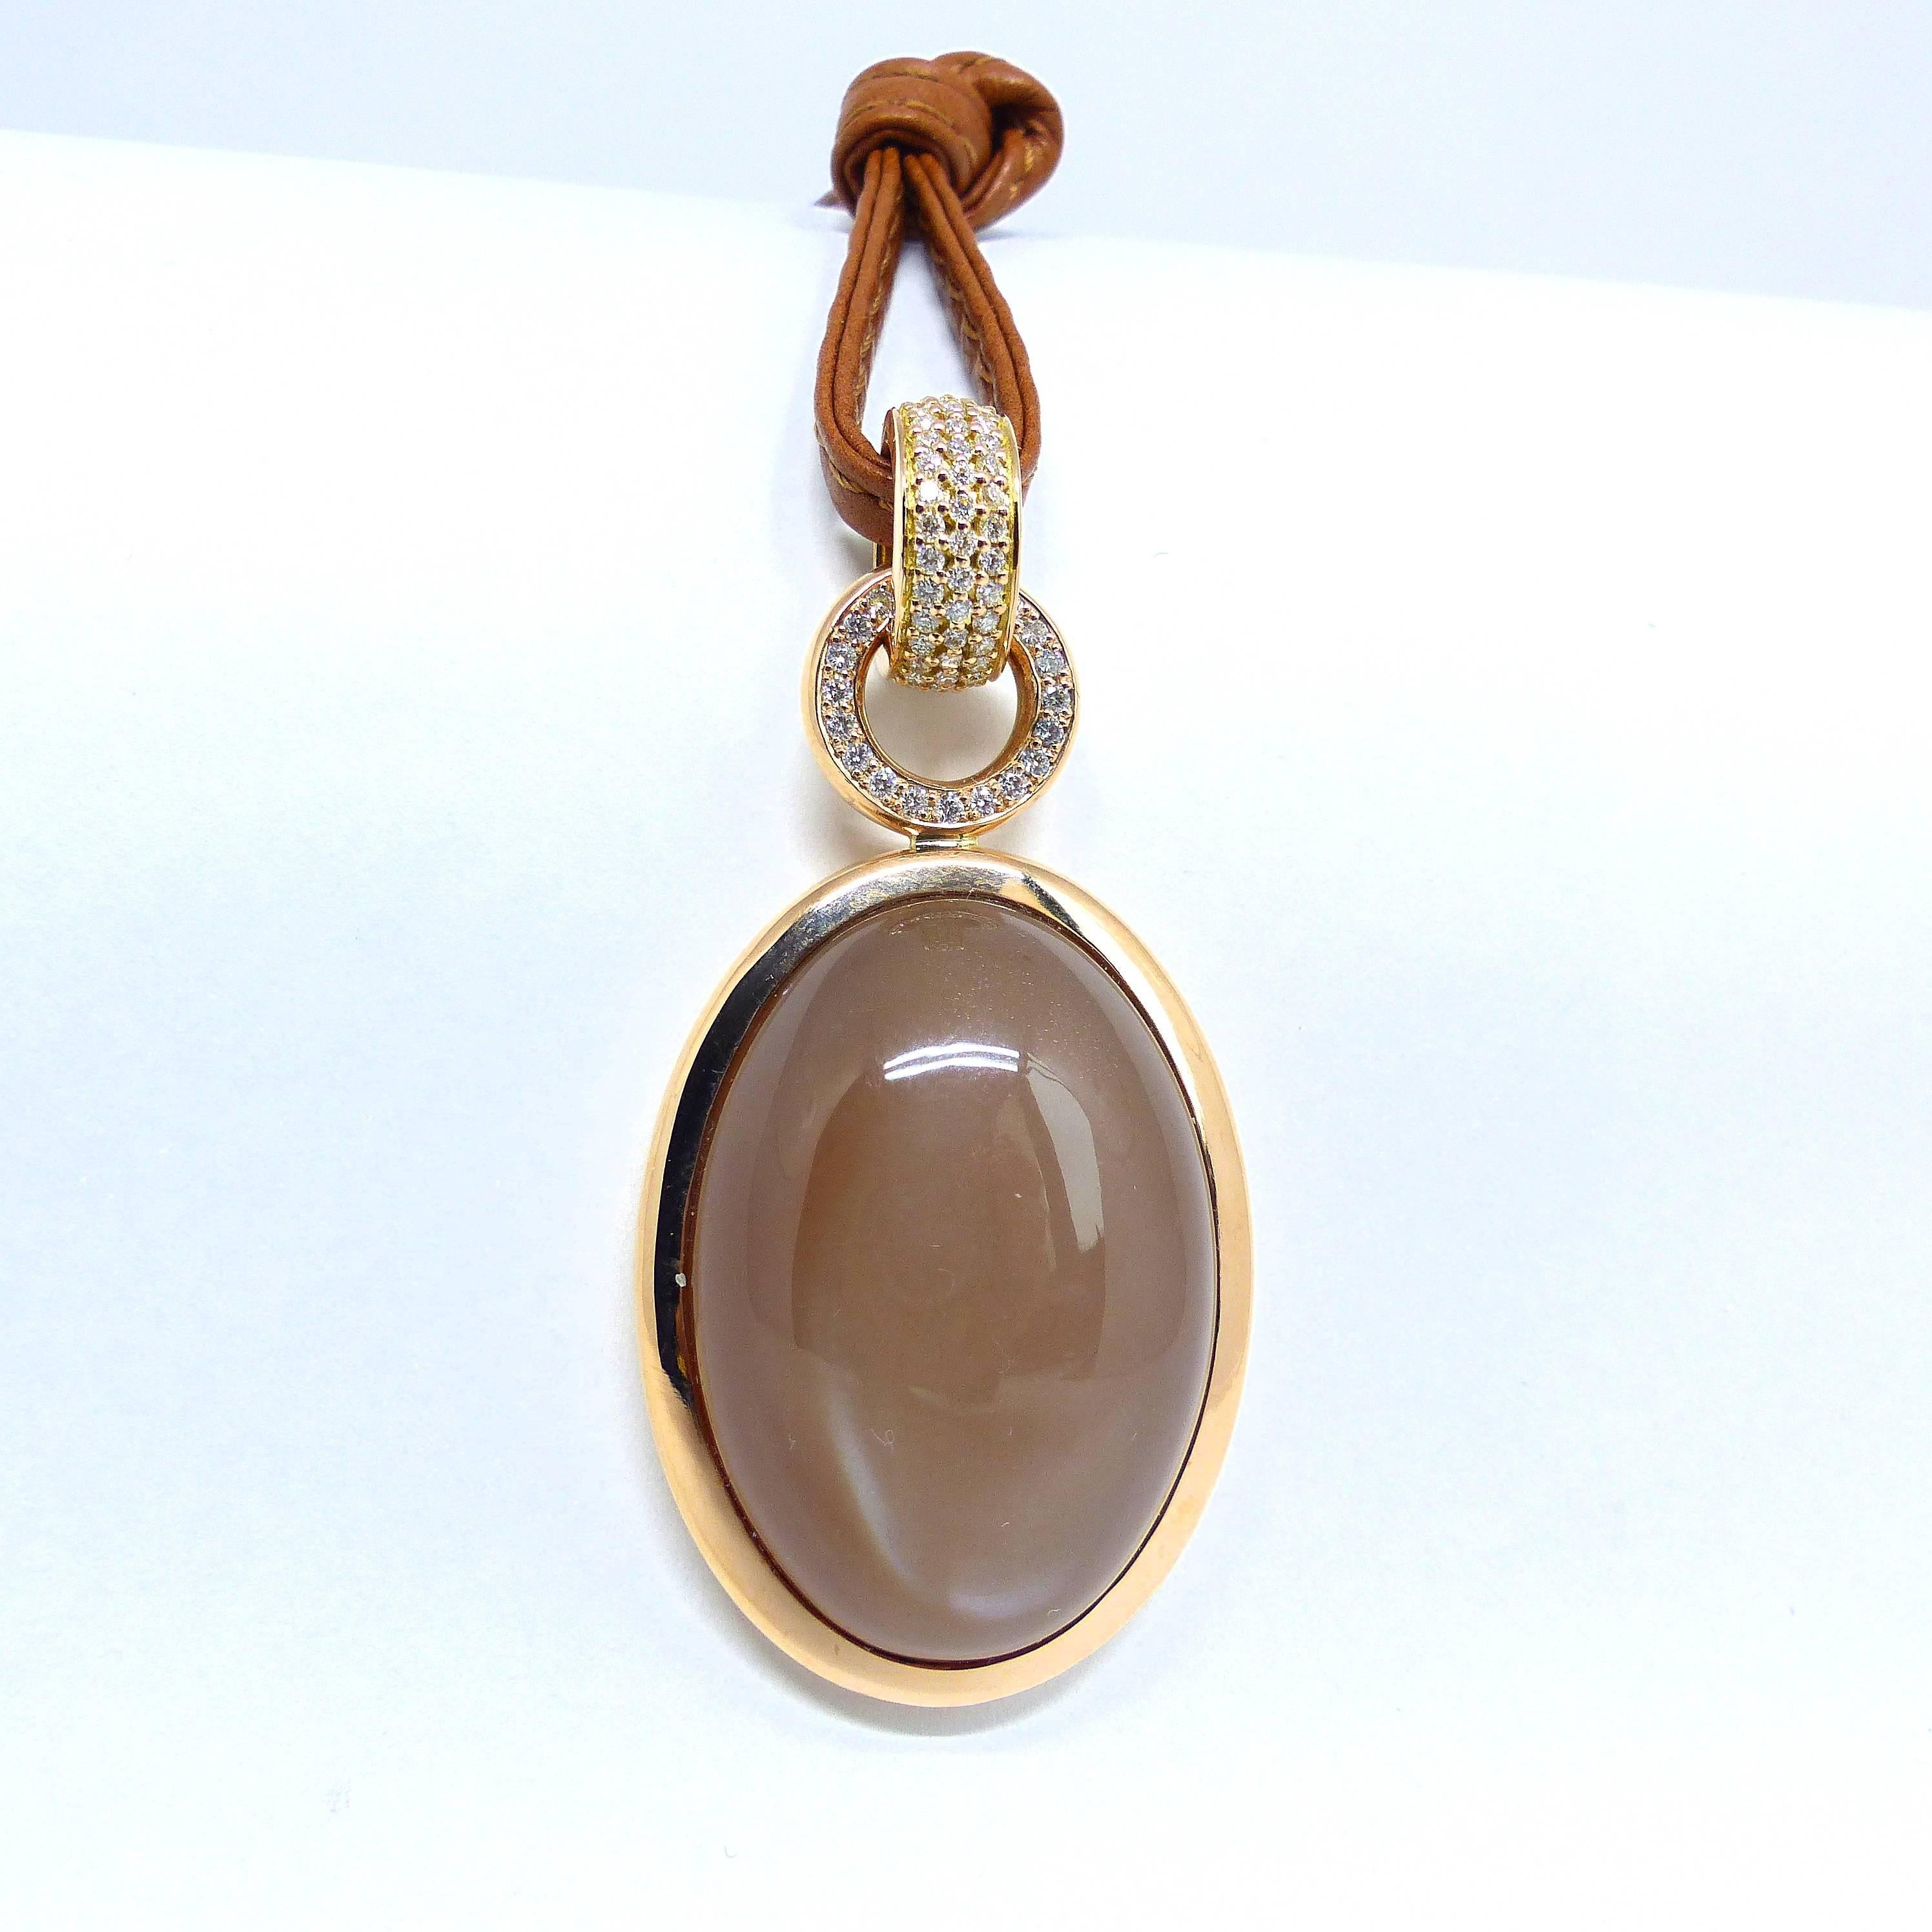 Thomas Leyser is renowned for his contemporary jewellery designs utilizing fine coloured gemstones and diamonds. 

This pendant in 18k red gold is set with a fine oval brown Moonstone Cabouchon in top quality (36x25mm). It is accentuated by diamonds